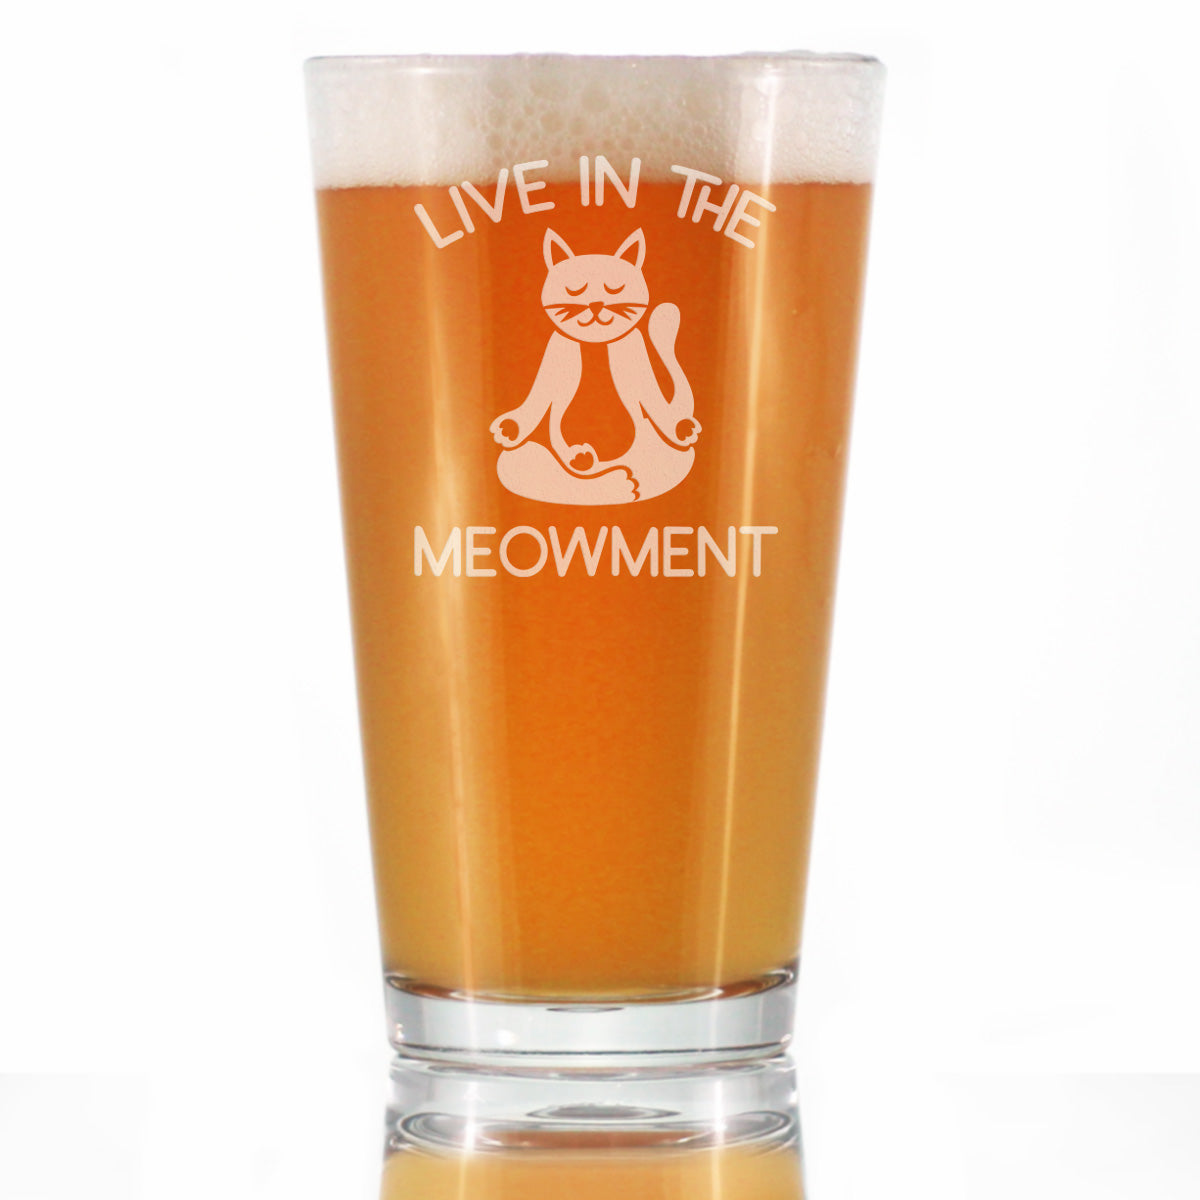 Live In The Meowment - Pint Glass for Beer - Funny Cat Gifts and Meditation Themed Decor - 16 oz Glasses